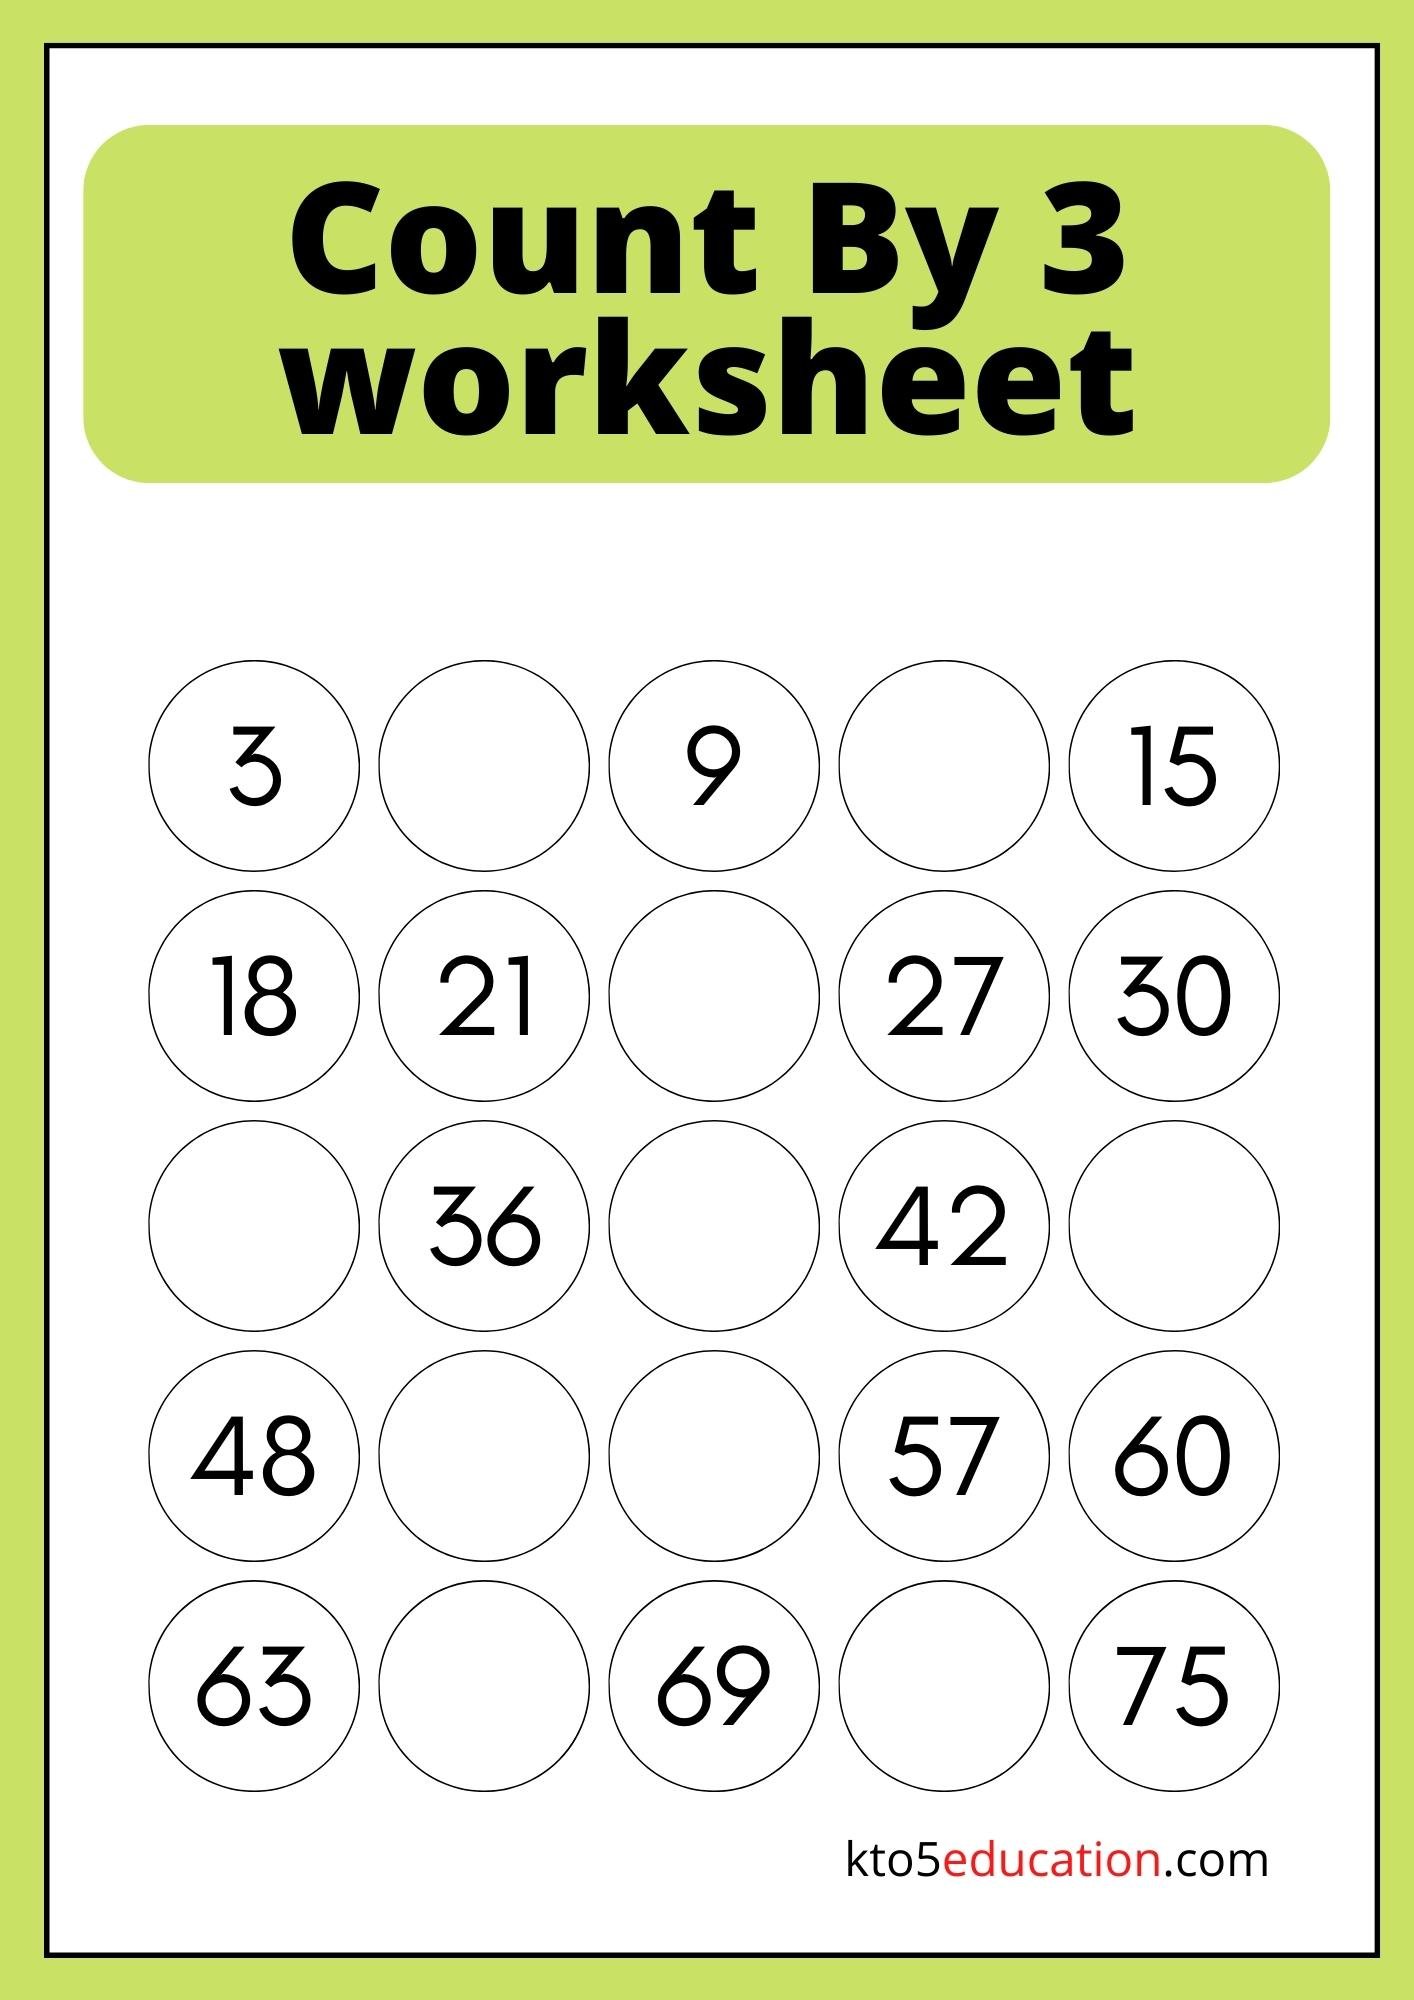 Count by 3 worksheet